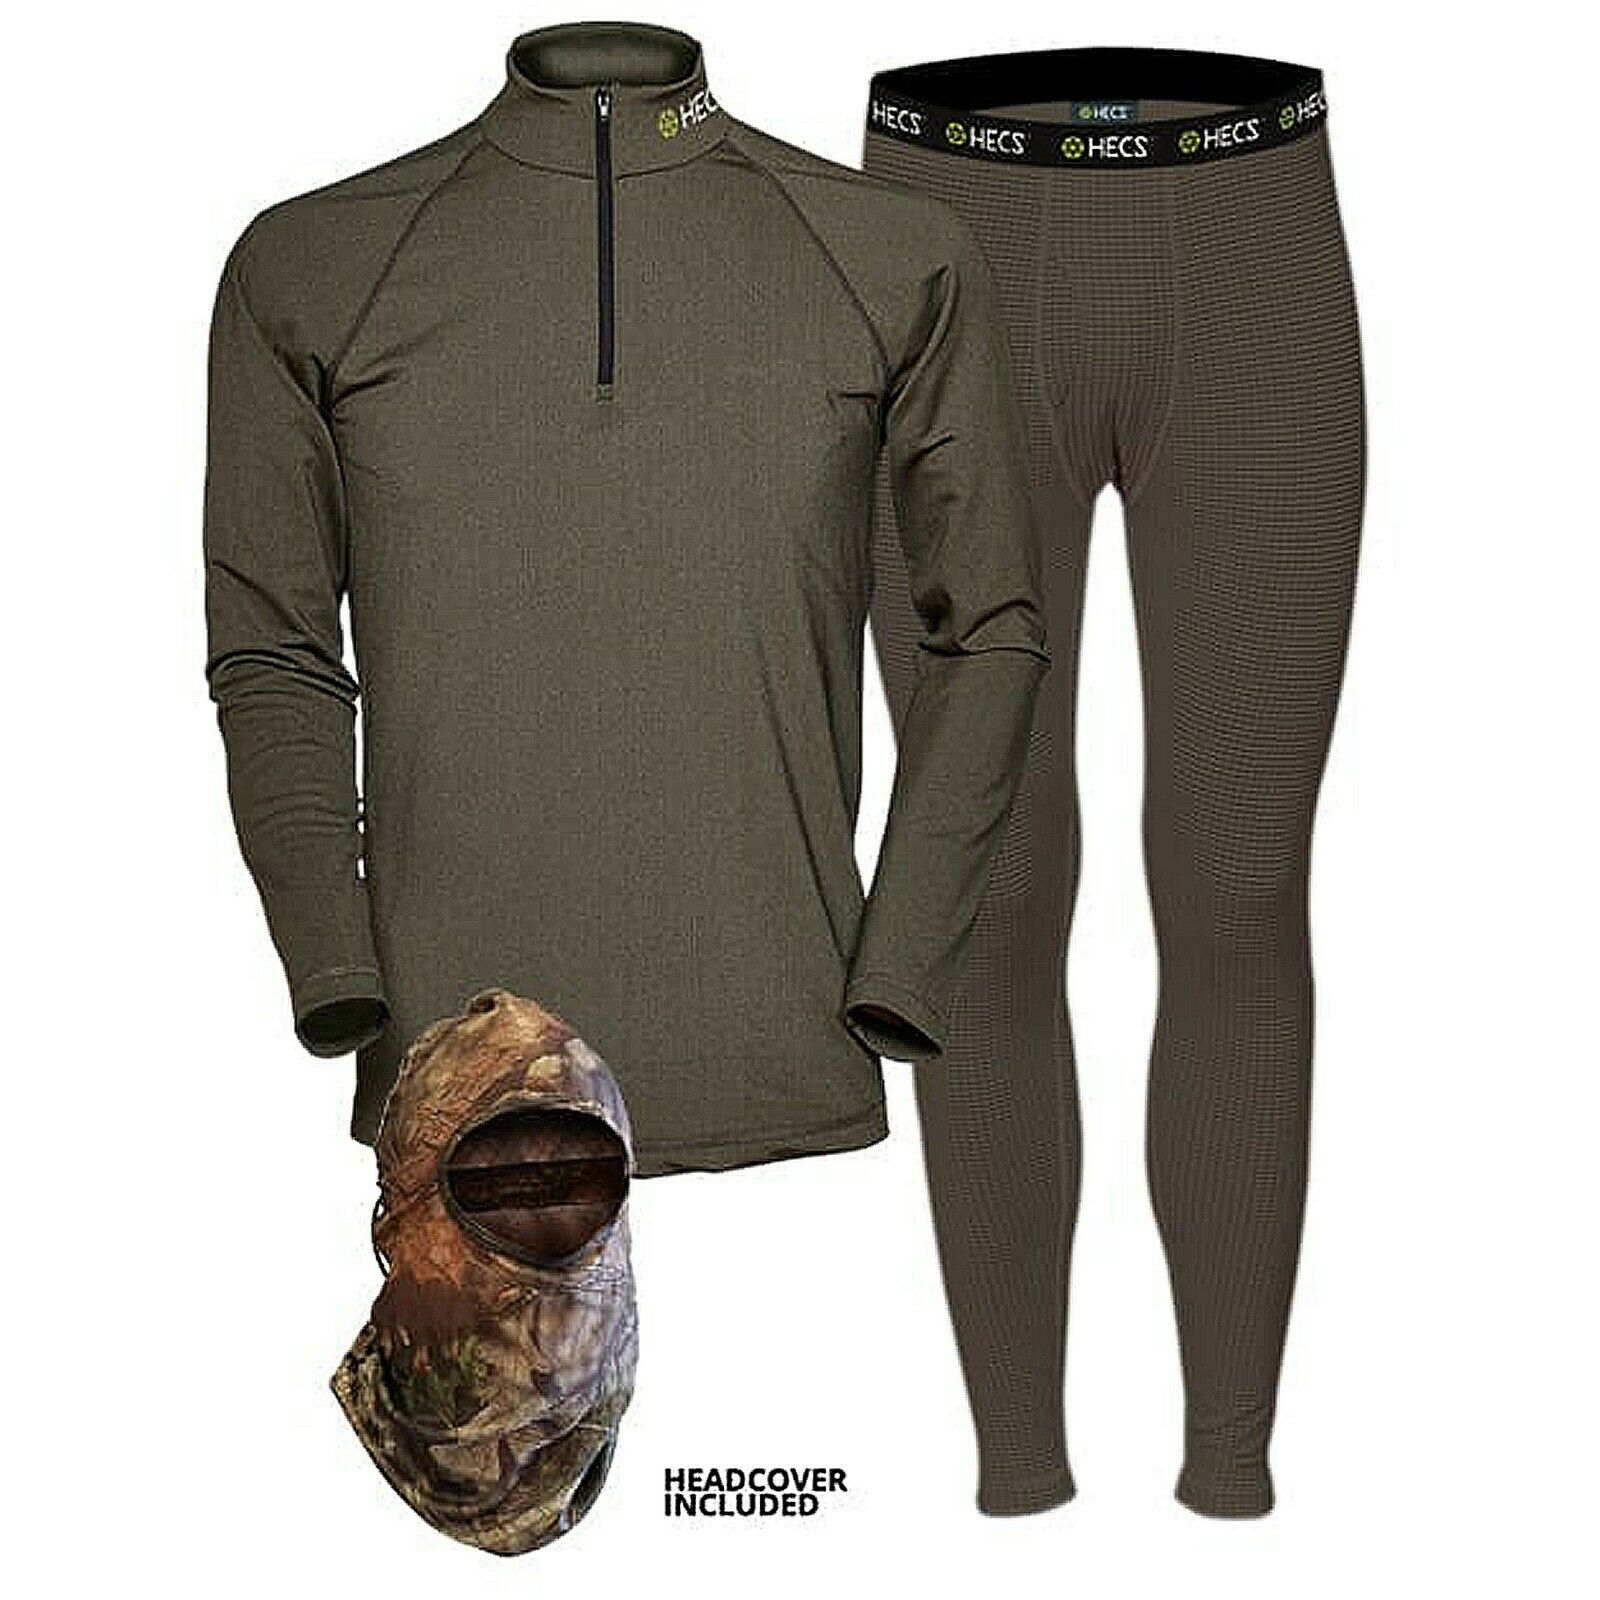 Hecs Suit Base Layer Hunting Suit - 3 Piece Shirt, Pants, Headcover | Sm-3x